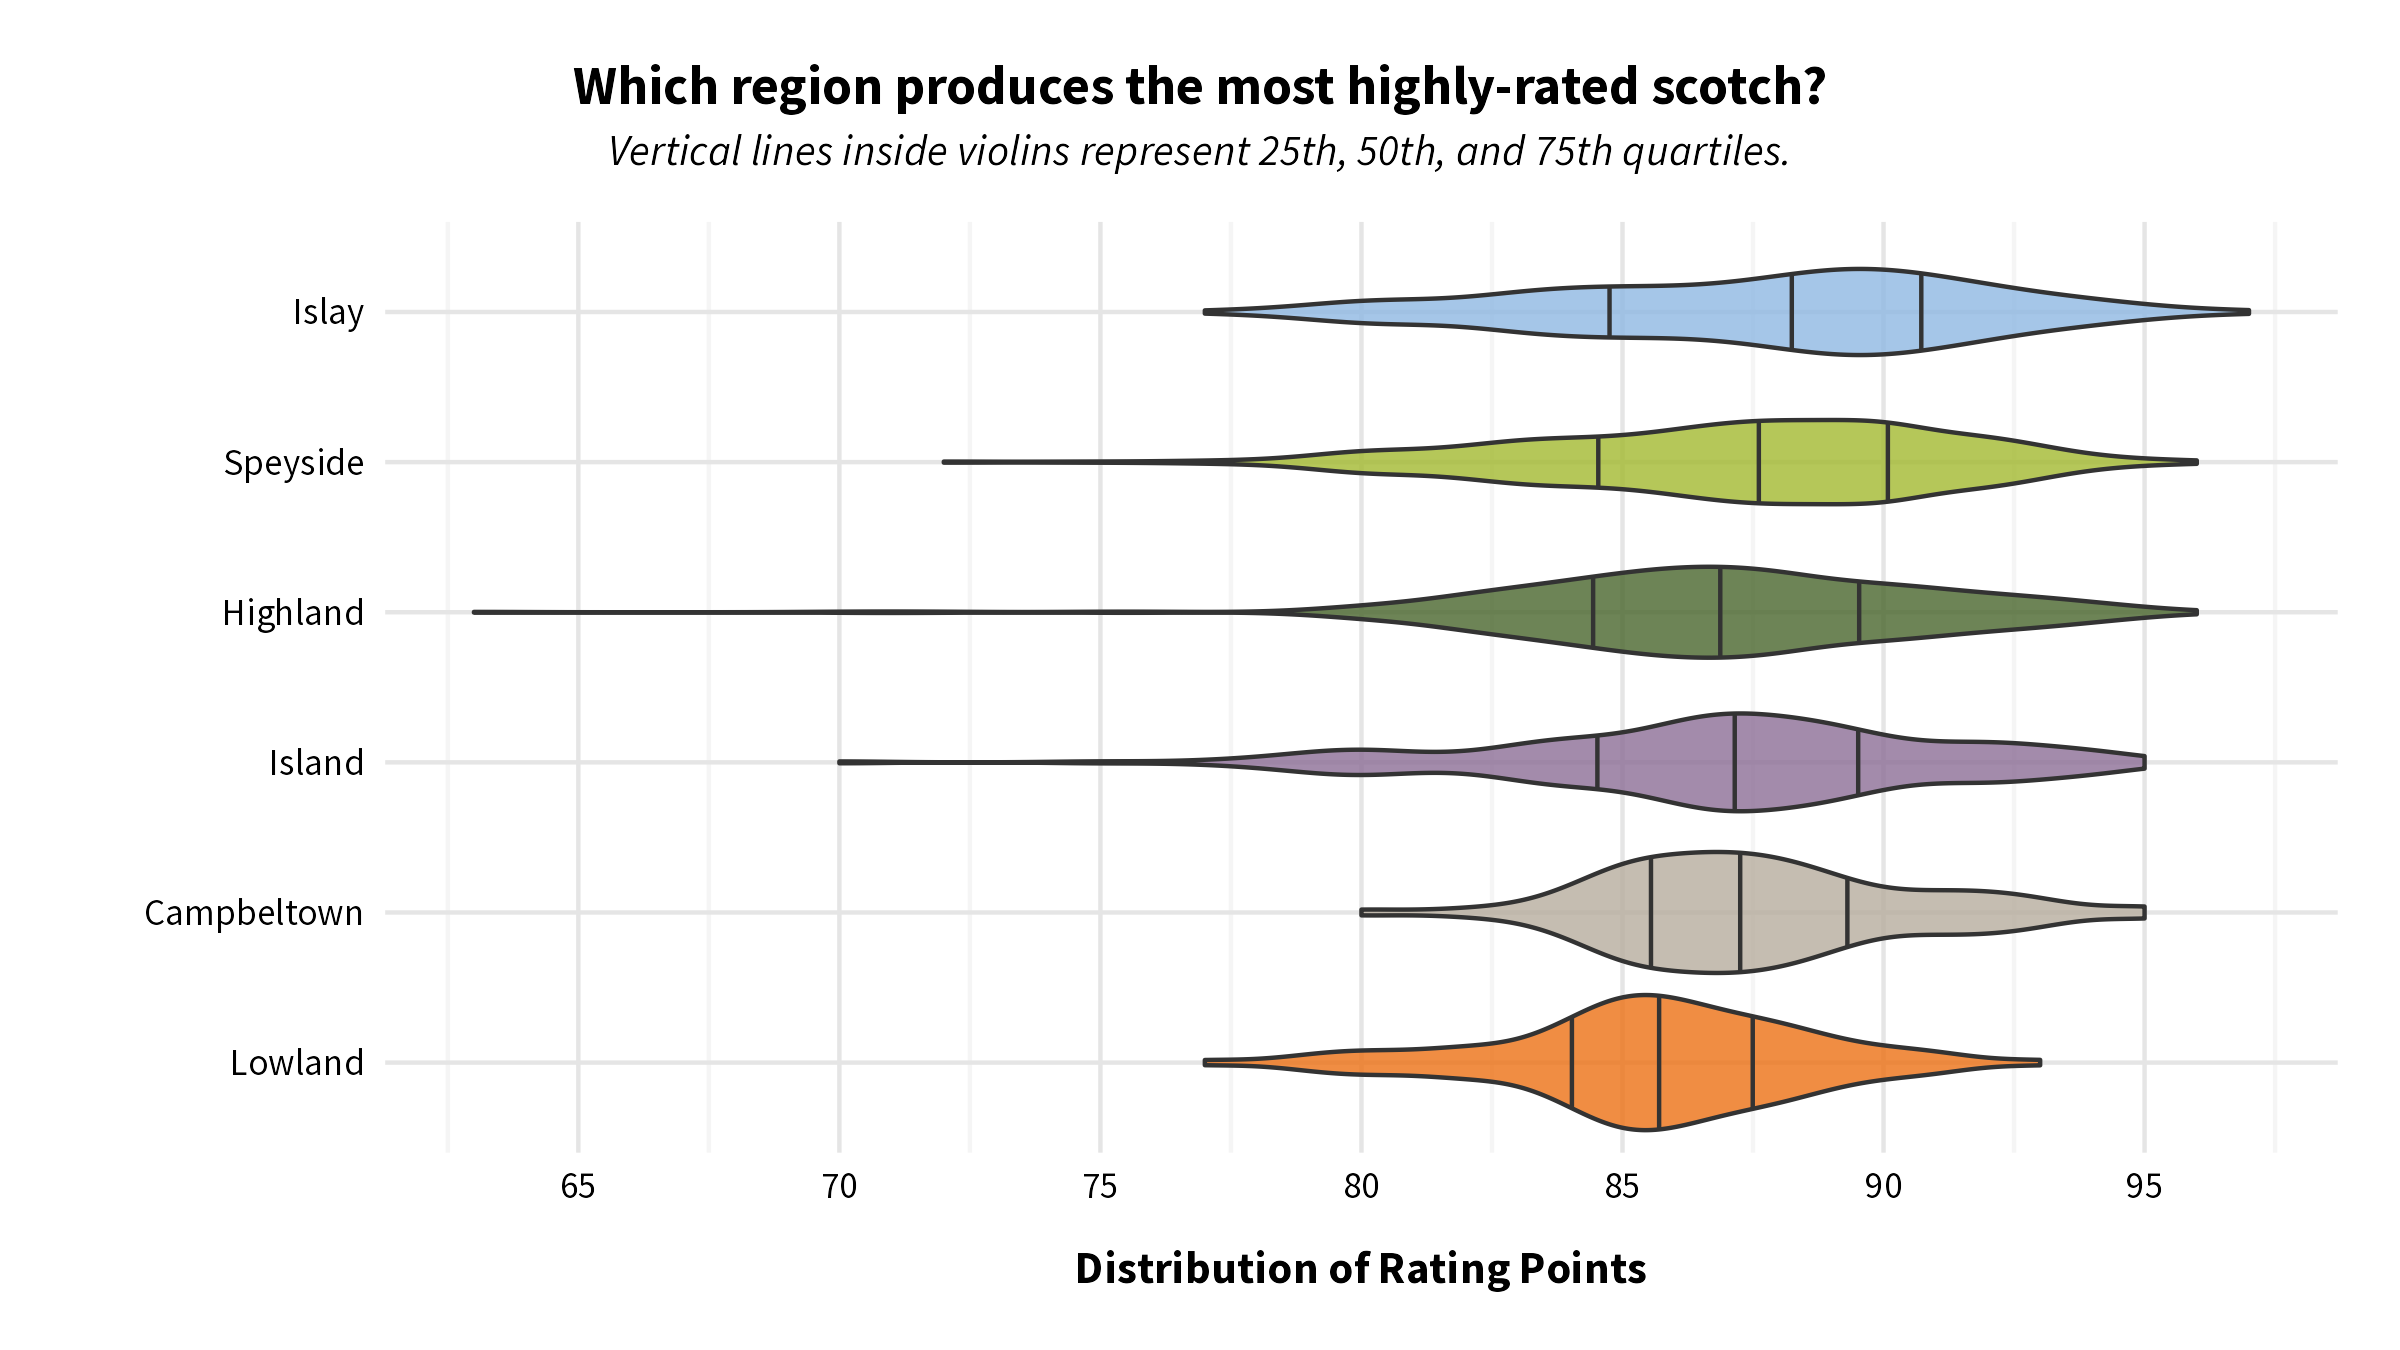 Distribution of whisky rating points by region.